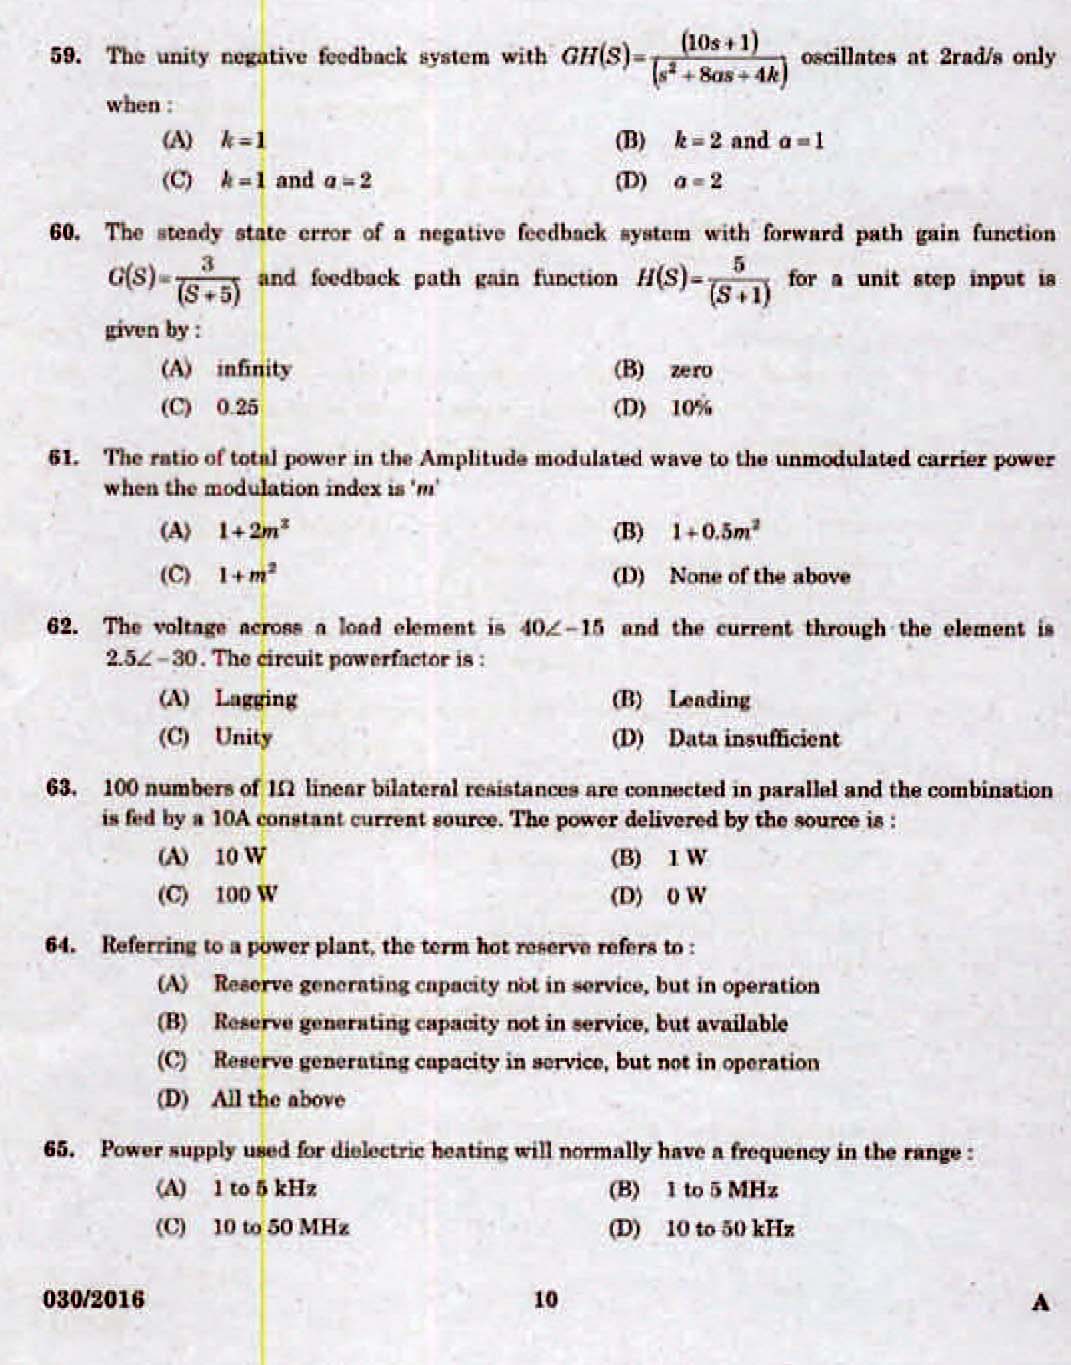 Kerala PSC Assistant Engineer Electrical Exam 2016 Question Paper Code 0302016 8